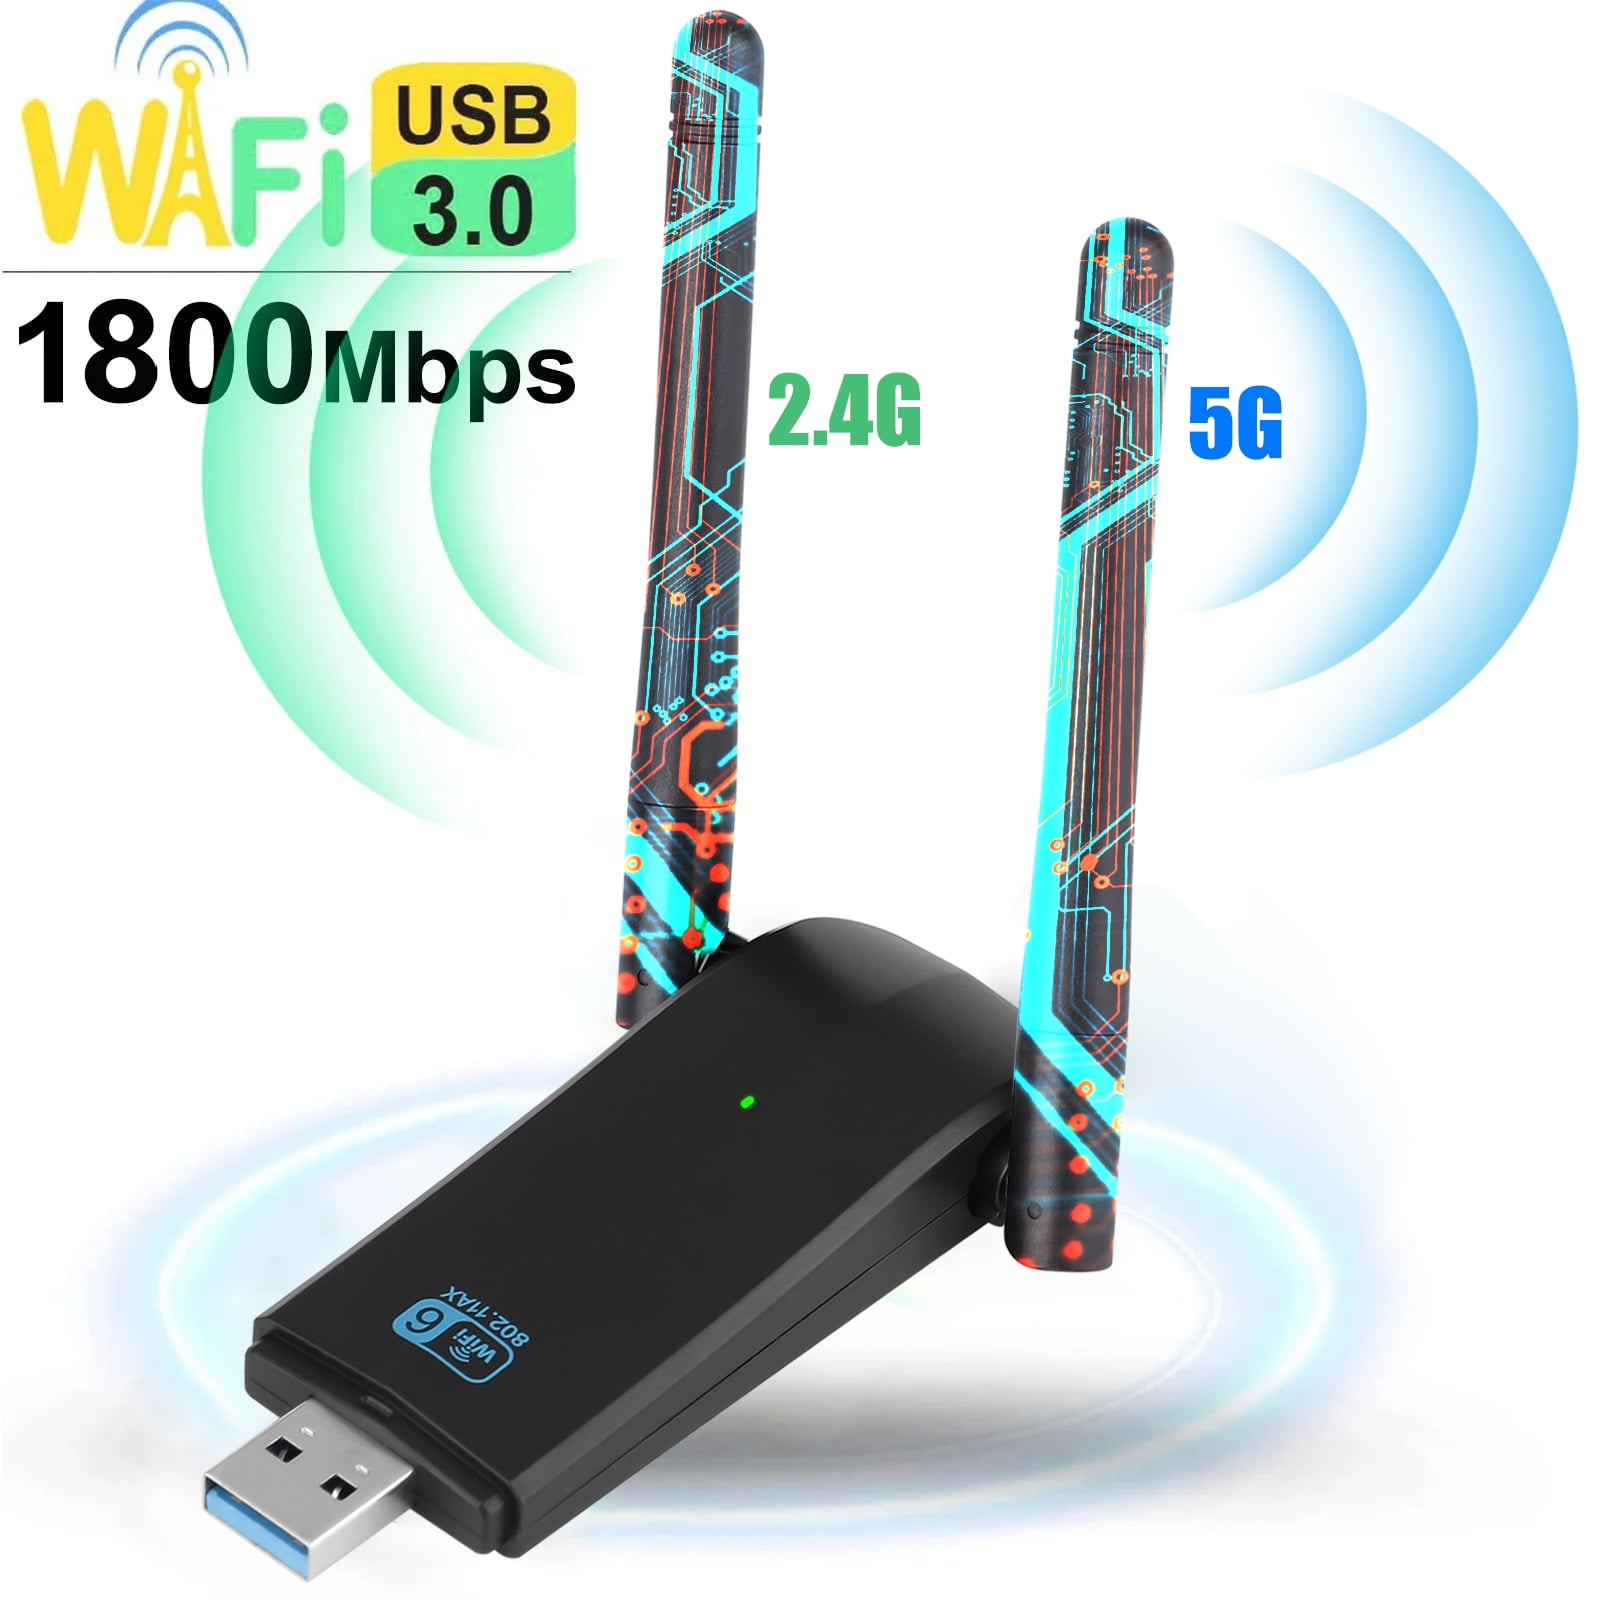 Usb 3.0 1800mbps Wifi 6 Adapter Dual Band 5ghz 2.4ghz 802.11ac Wifi Dongle  High Performance Network Card For Laptop Desktop